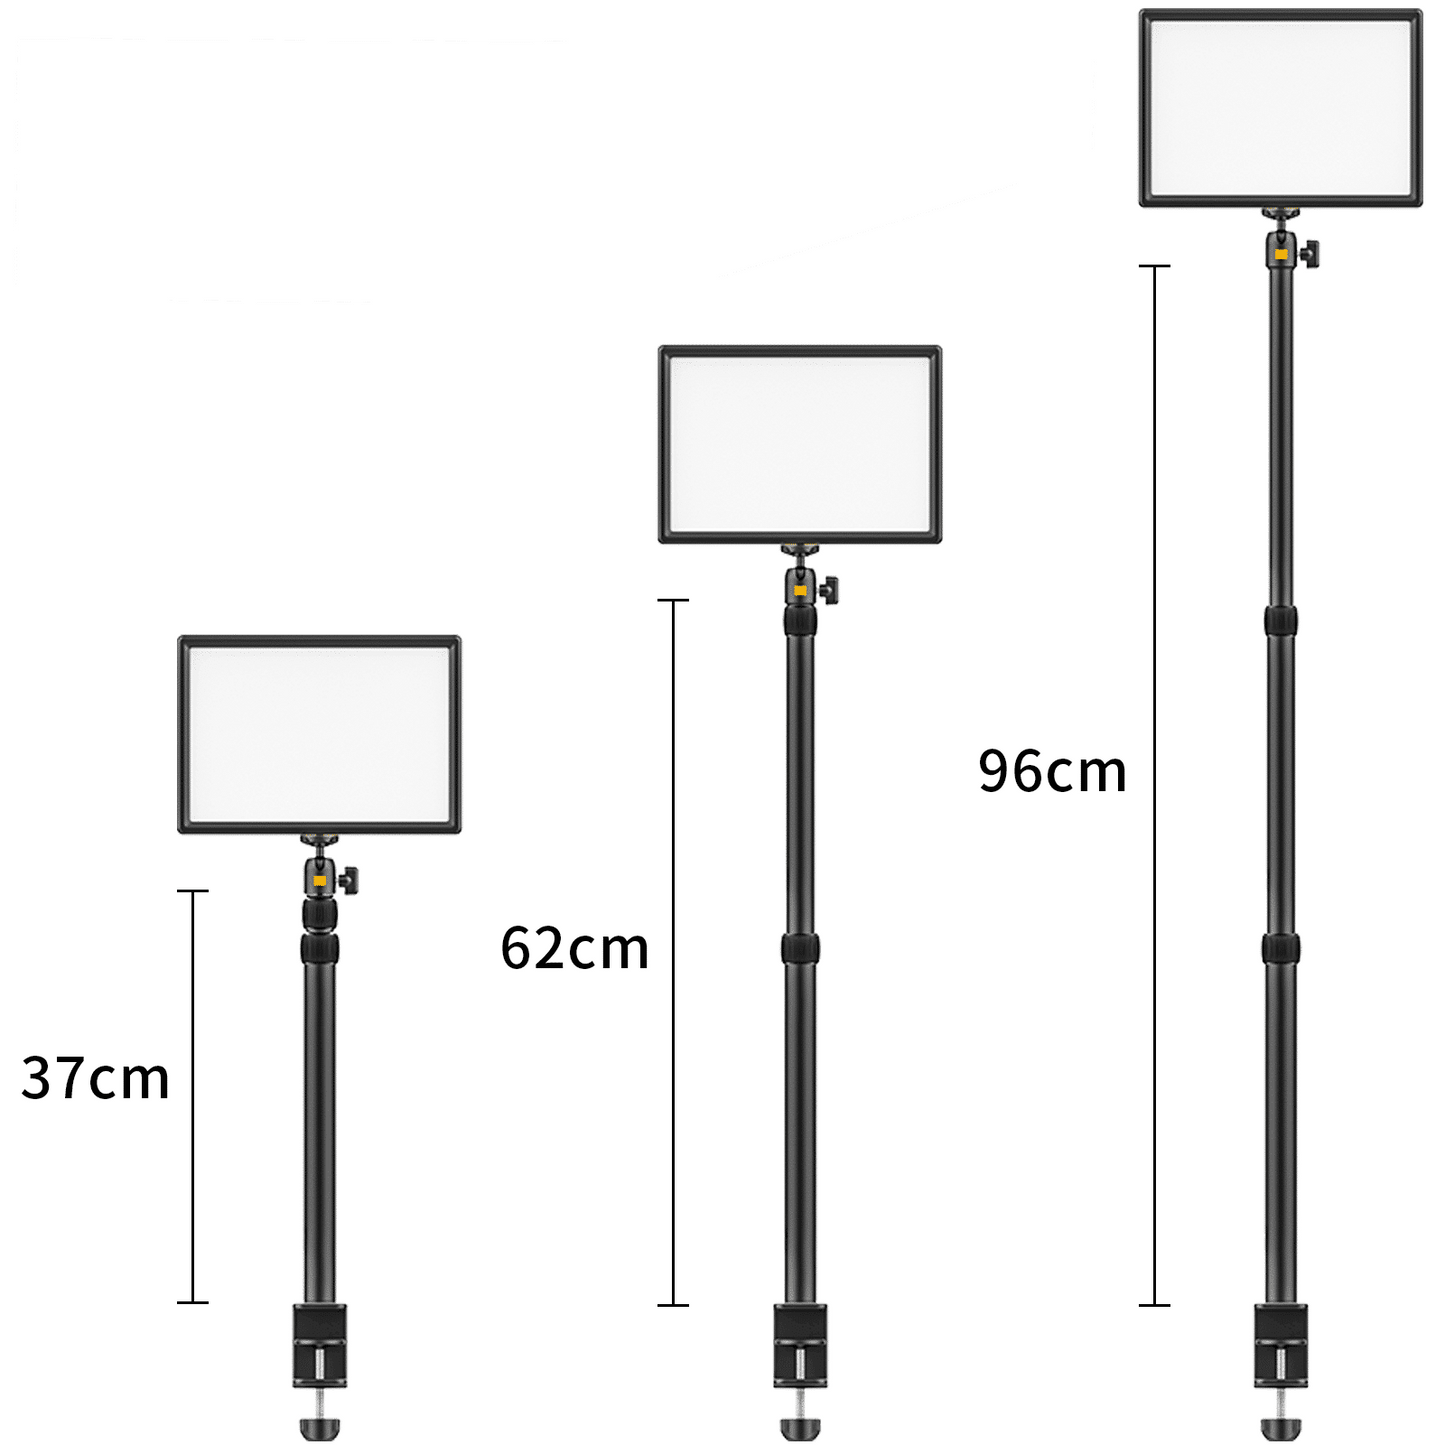 VIJIM LS01 extendable lamp stand with table clamp